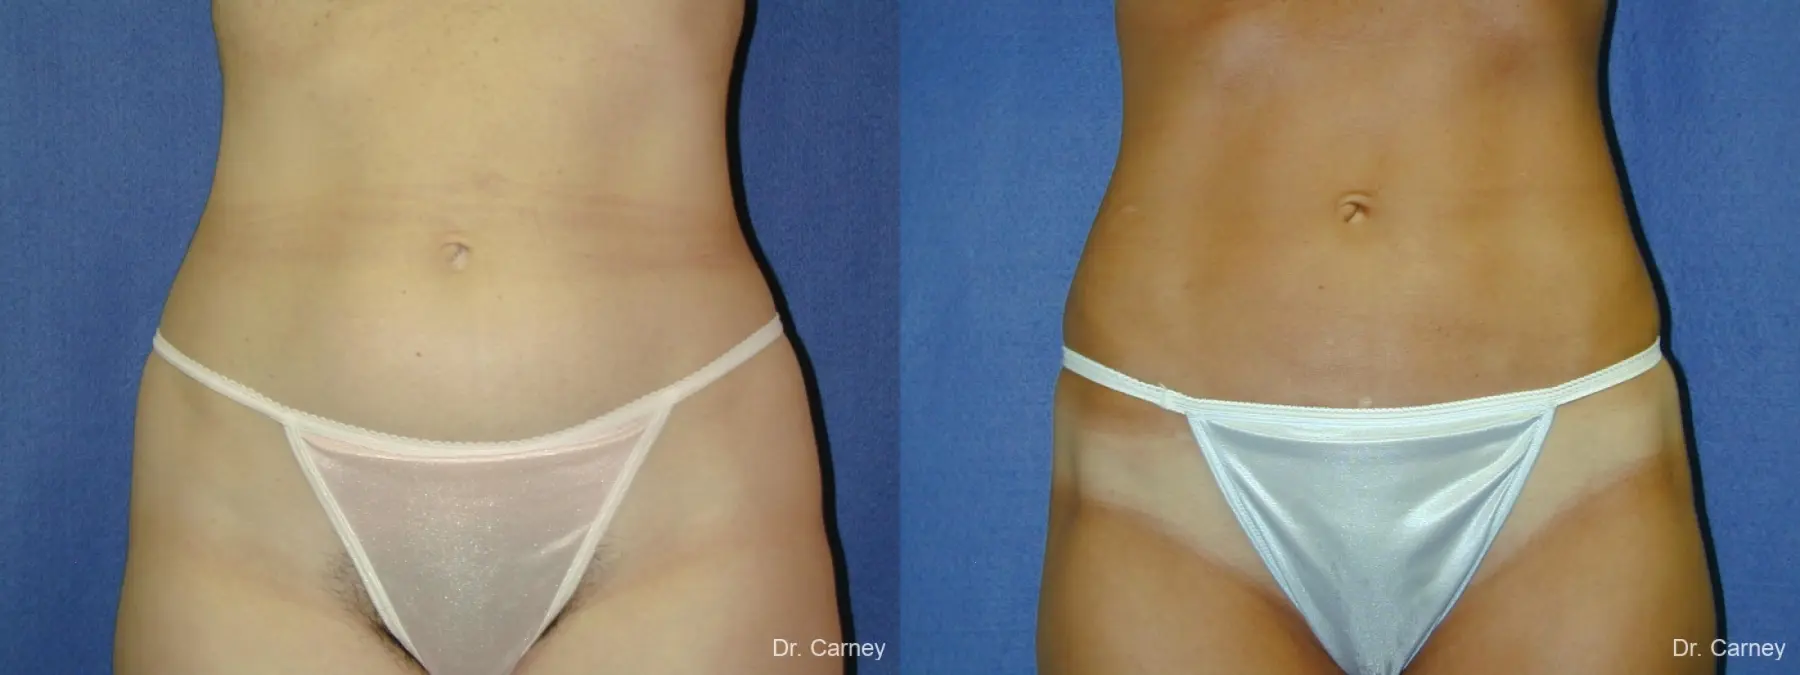 Virginia Beach Liposuction 1282 - Before and After